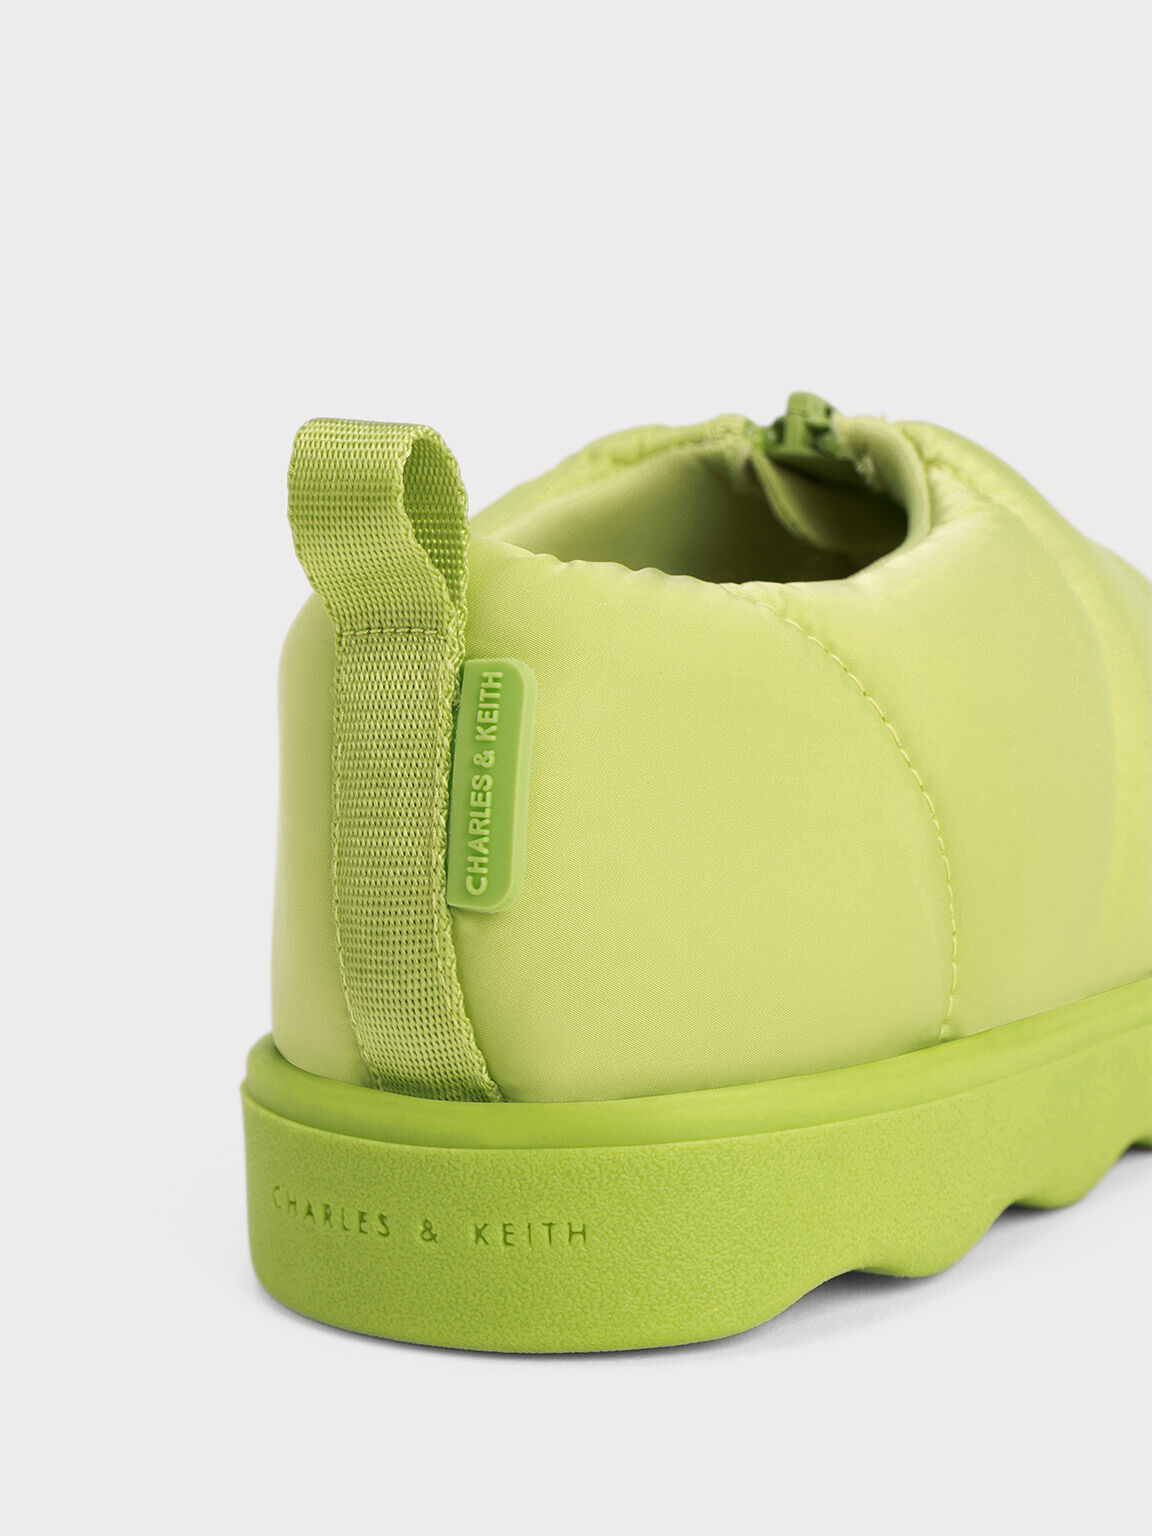 Sepatu Loafers Girls' Puffy Nylon Panelled, Lime, hi-res